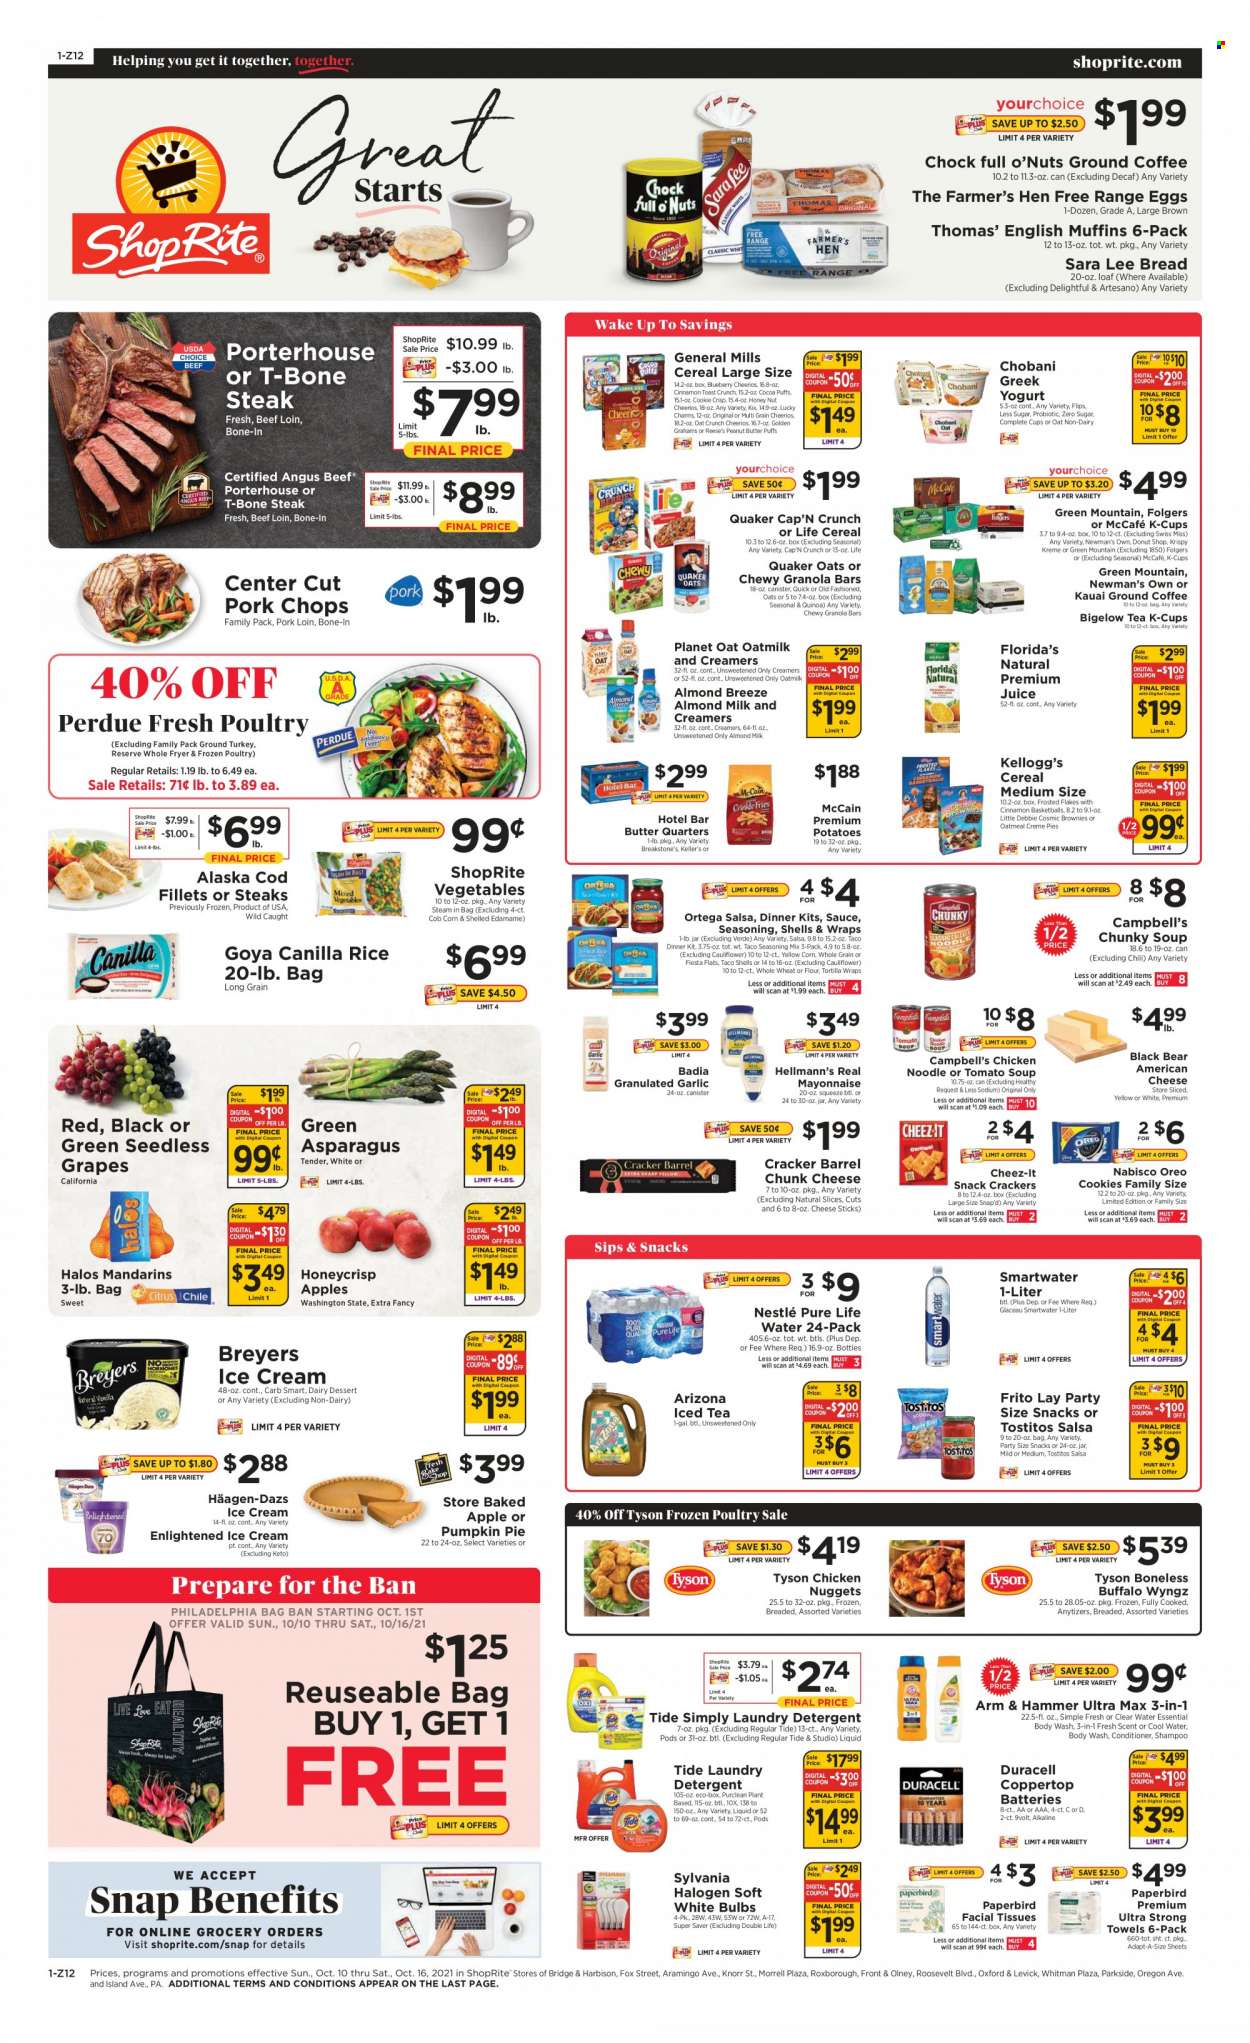 thumbnail - ShopRite Flyer - 10/10/2021 - 10/16/2021 - Sales products - seedless grapes, bread, tortillas, pie, Sara Lee, wraps, brownies, asparagus, corn, Edamame, garlic, potatoes, pumpkin, apples, grapes, mandarines, cod, Campbell's, tomato soup, soup, nuggets, Knorr, chicken nuggets, dinner kit, Quaker, noodles, Perdue®, american cheese, Philadelphia, cheese, chunk cheese, greek yoghurt, Oreo, yoghurt, Chobani, Swiss Miss, almond milk, Almond Breeze, oat milk, eggs, mayonnaise, Hellmann’s, ice cream, Reese's, Häagen-Dazs, Enlightened lce Cream, cheese sticks, McCain, cookies, Nestlé, snack, crackers, Kellogg's, Florida's Natural, Cheez-It, Tostitos, ARM & HAMMER, cocoa, oatmeal, Goya, Badia, cereals, Cheerios, granola bar, Cap'n Crunch, Frosted Flakes, quinoa, rice, spice, salsa, peanut butter, juice, ice tea, AriZona, Pure Life Water, Smartwater, Folgers, coffee capsules, McCafe, K-Cups, Green Mountain, ground turkey, beef meat, t-bone steak, steak, pork chops, pork loin, pork meat, tissues, detergent, Tide, laundry detergent, body wash, shampoo, facial tissues, conditioner, battery, bulb, Duracell, Sylvania. Page 1.